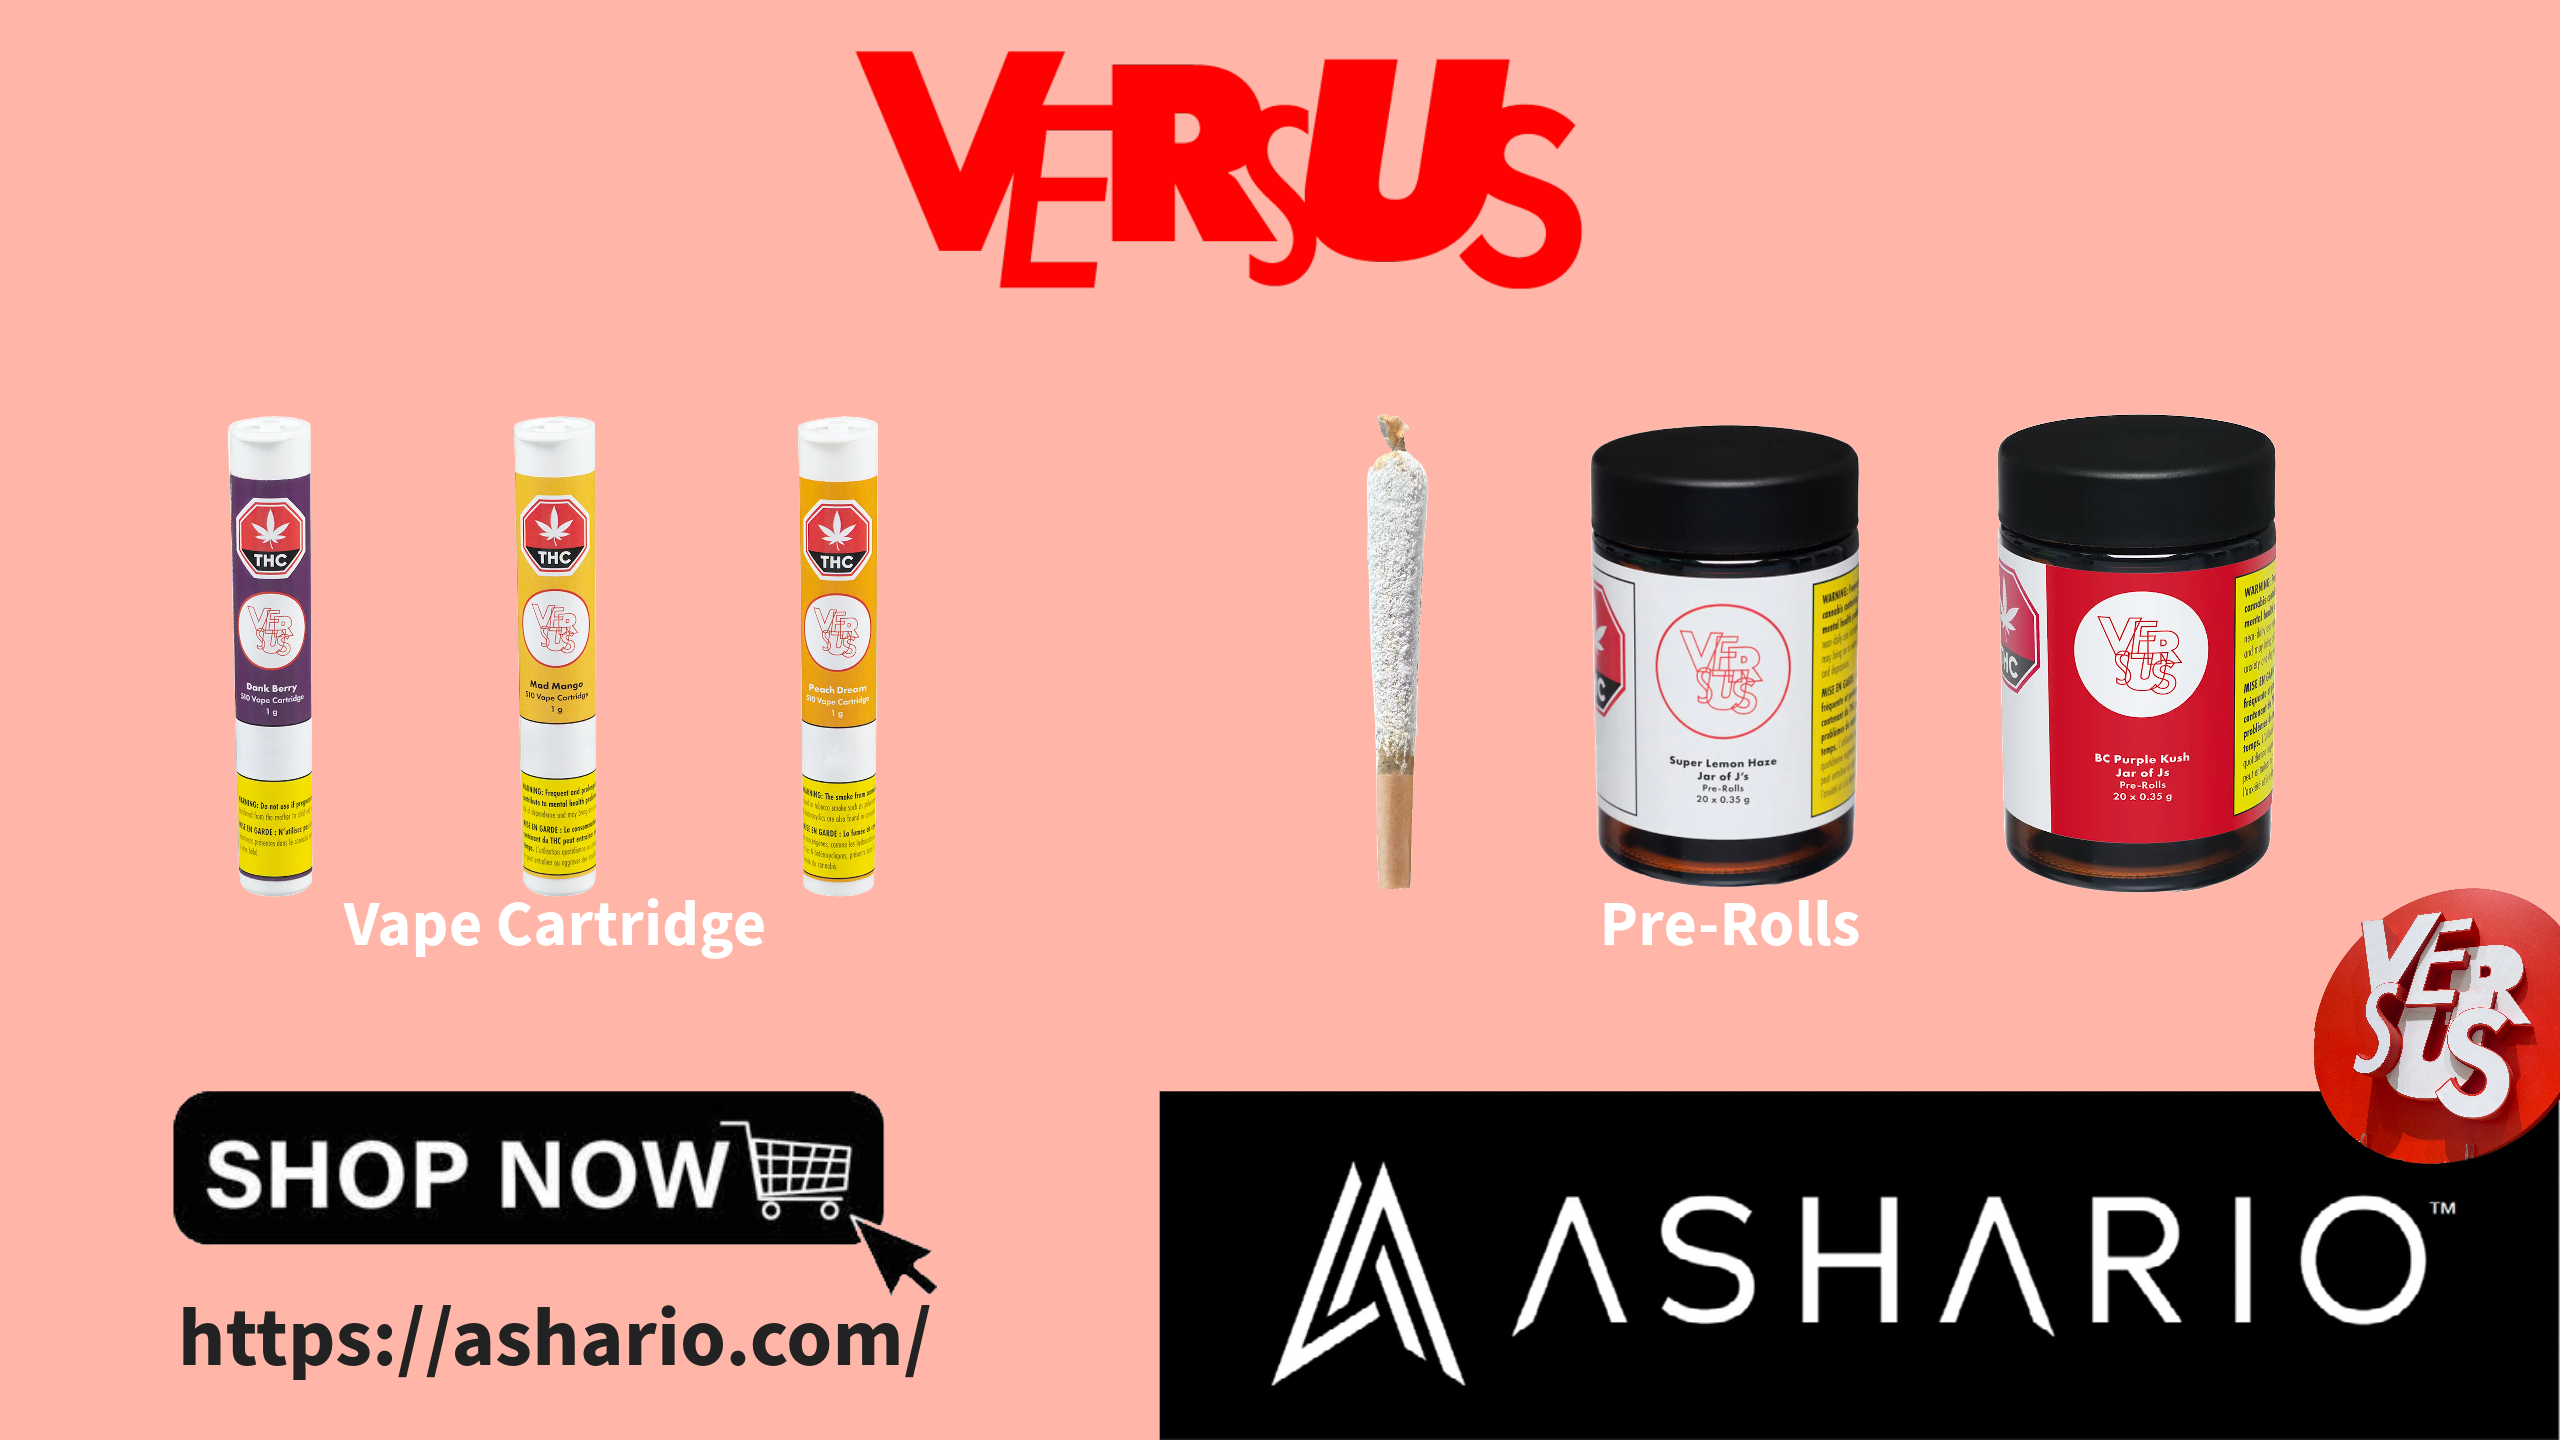 Step into the world of Versus/Verse, a brand that challenges conventions and sparks creativity, now exclusively available at Ashario Cannabis.